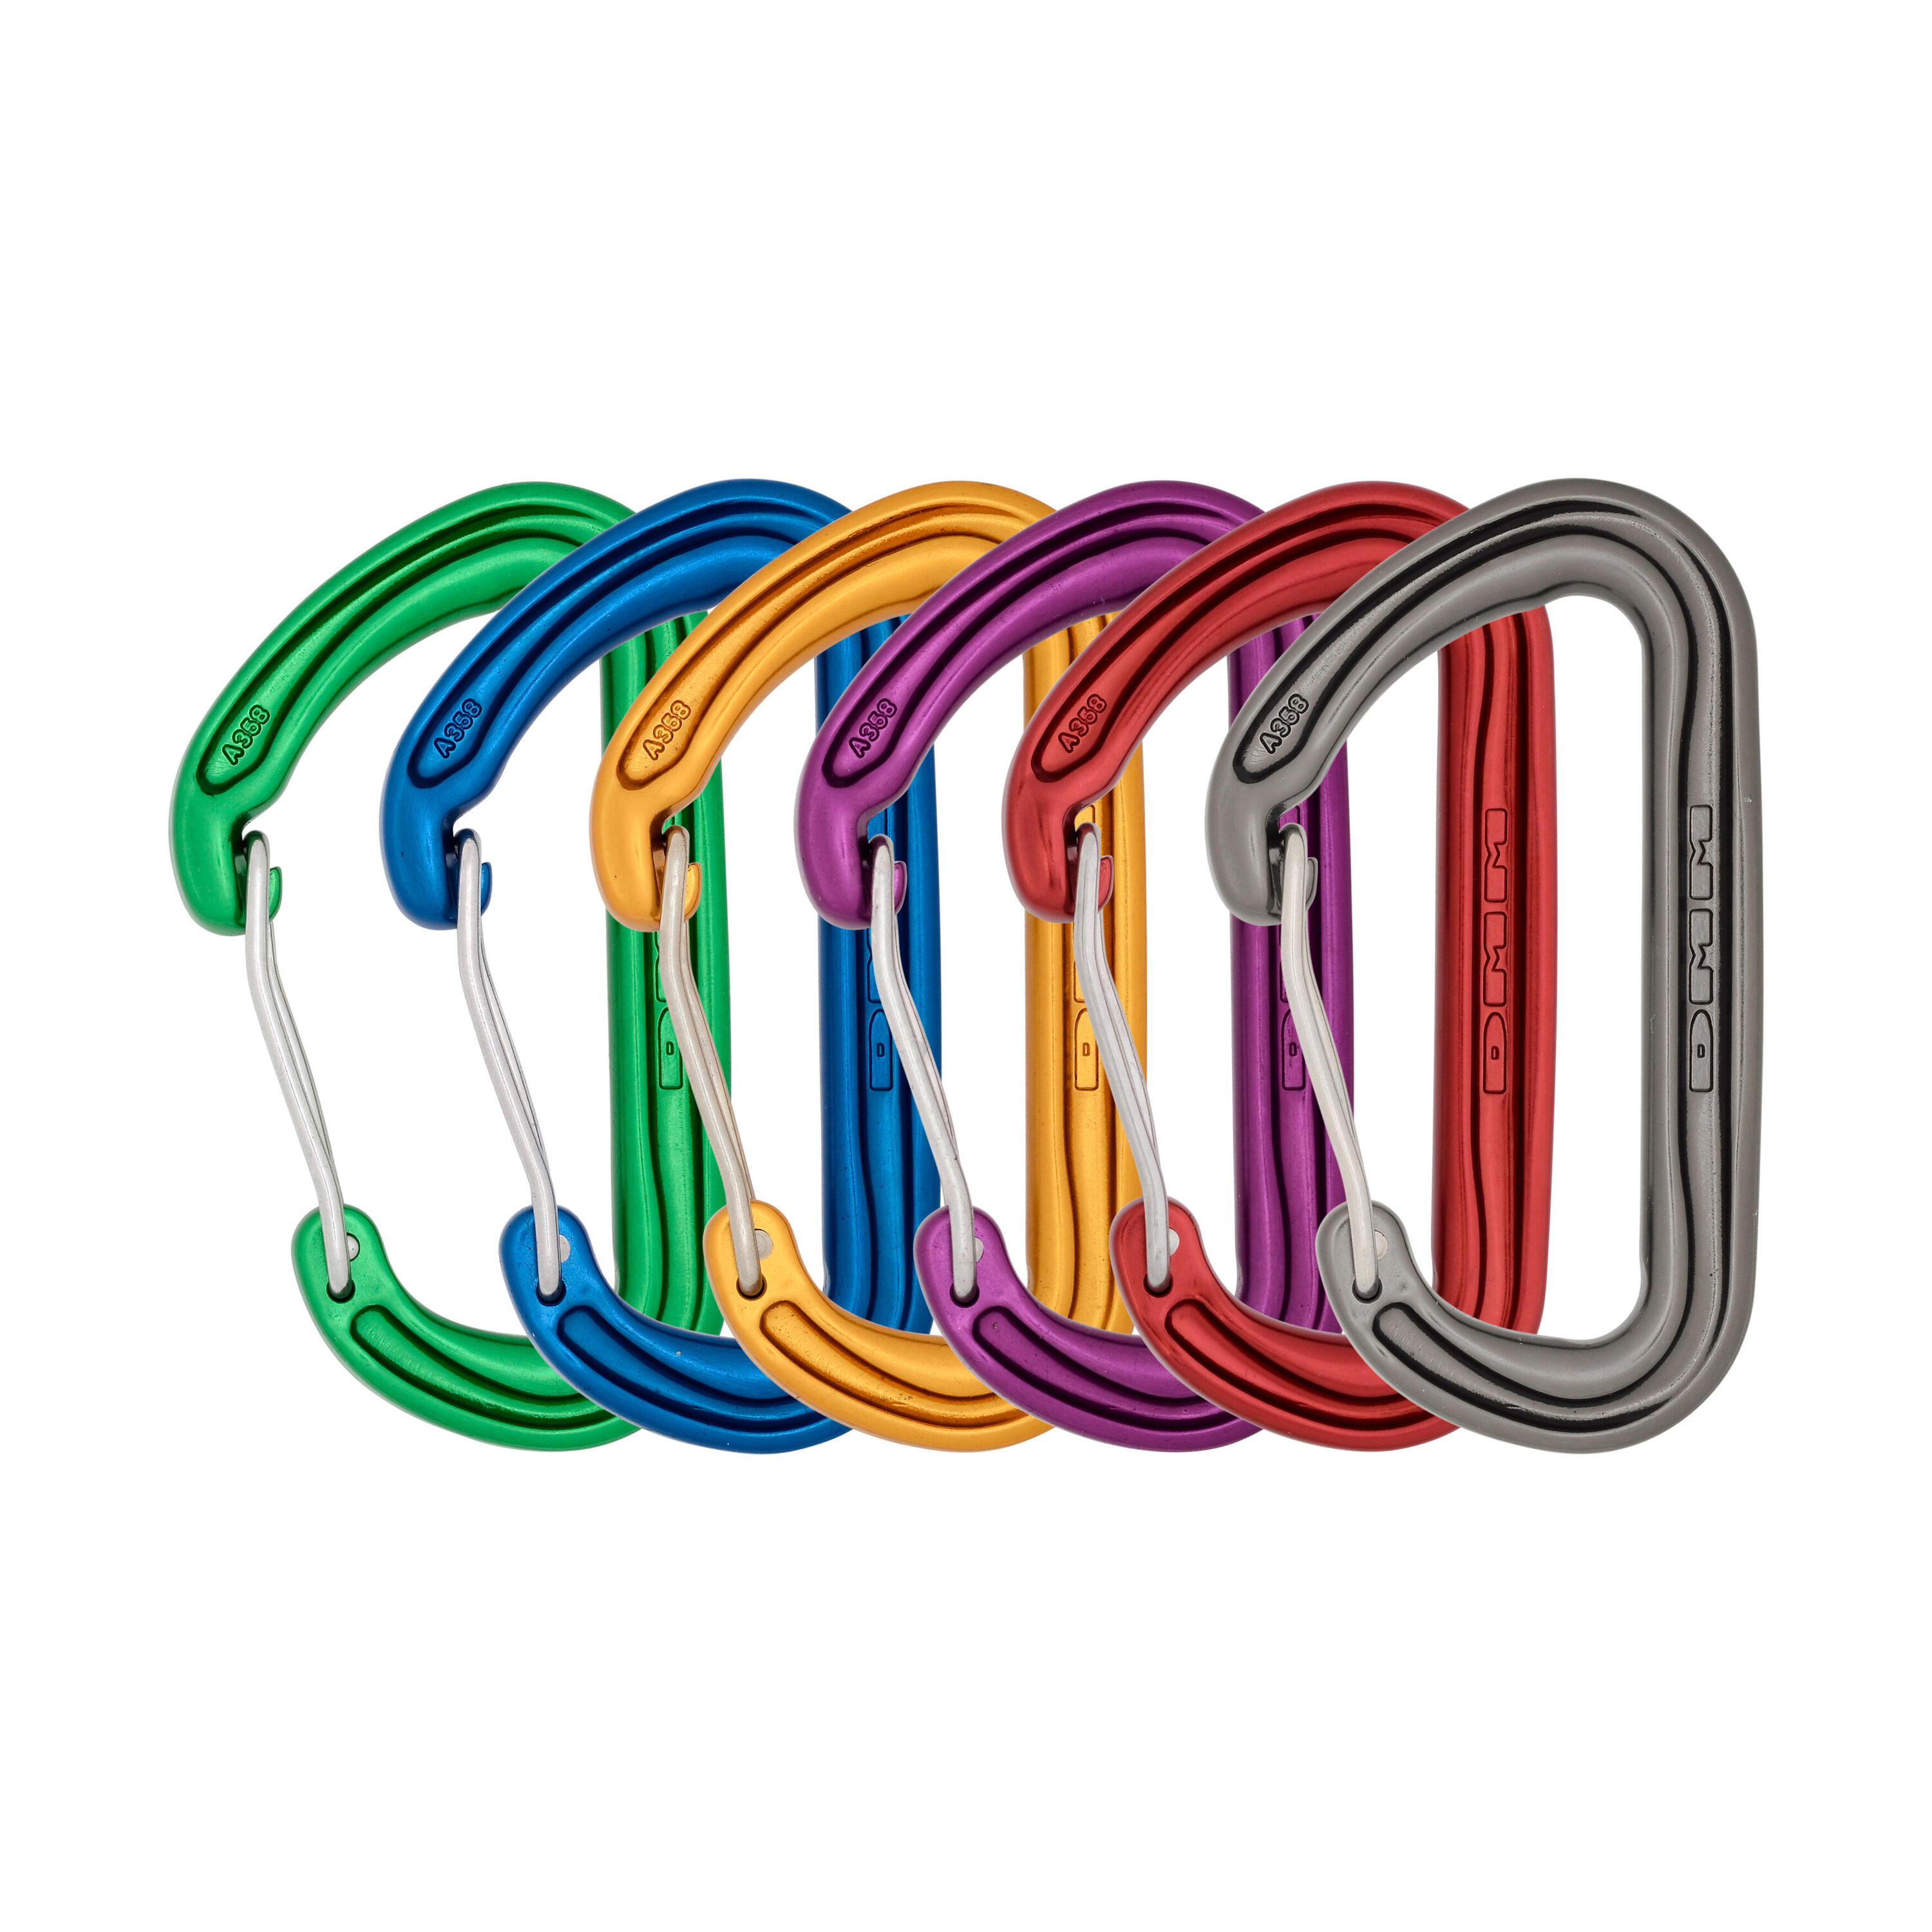 Spectre Wiregate Carabiner - 6 Pack - Assorted 1/7